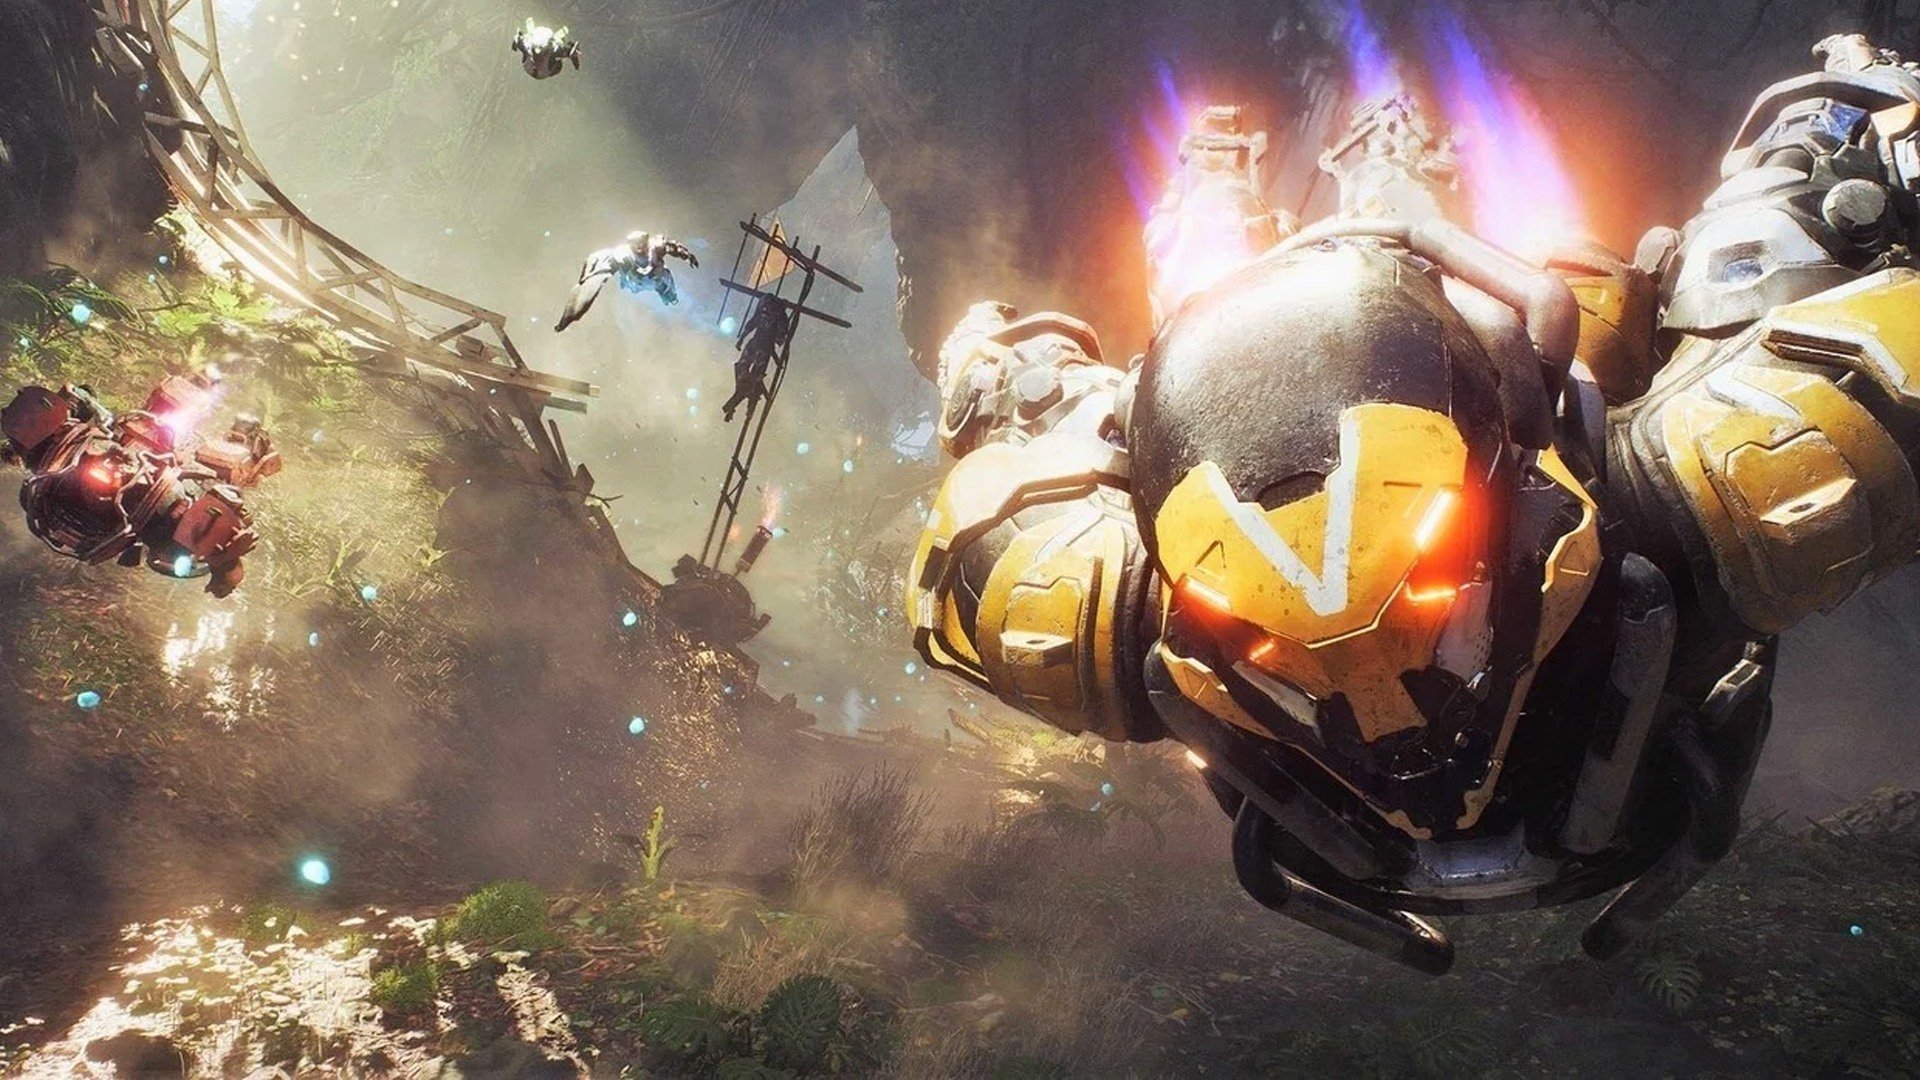 Anthem Next canceled redesign BioWare EA Sony PlayStation 5 Microsoft Xbox Series X new consoles could help